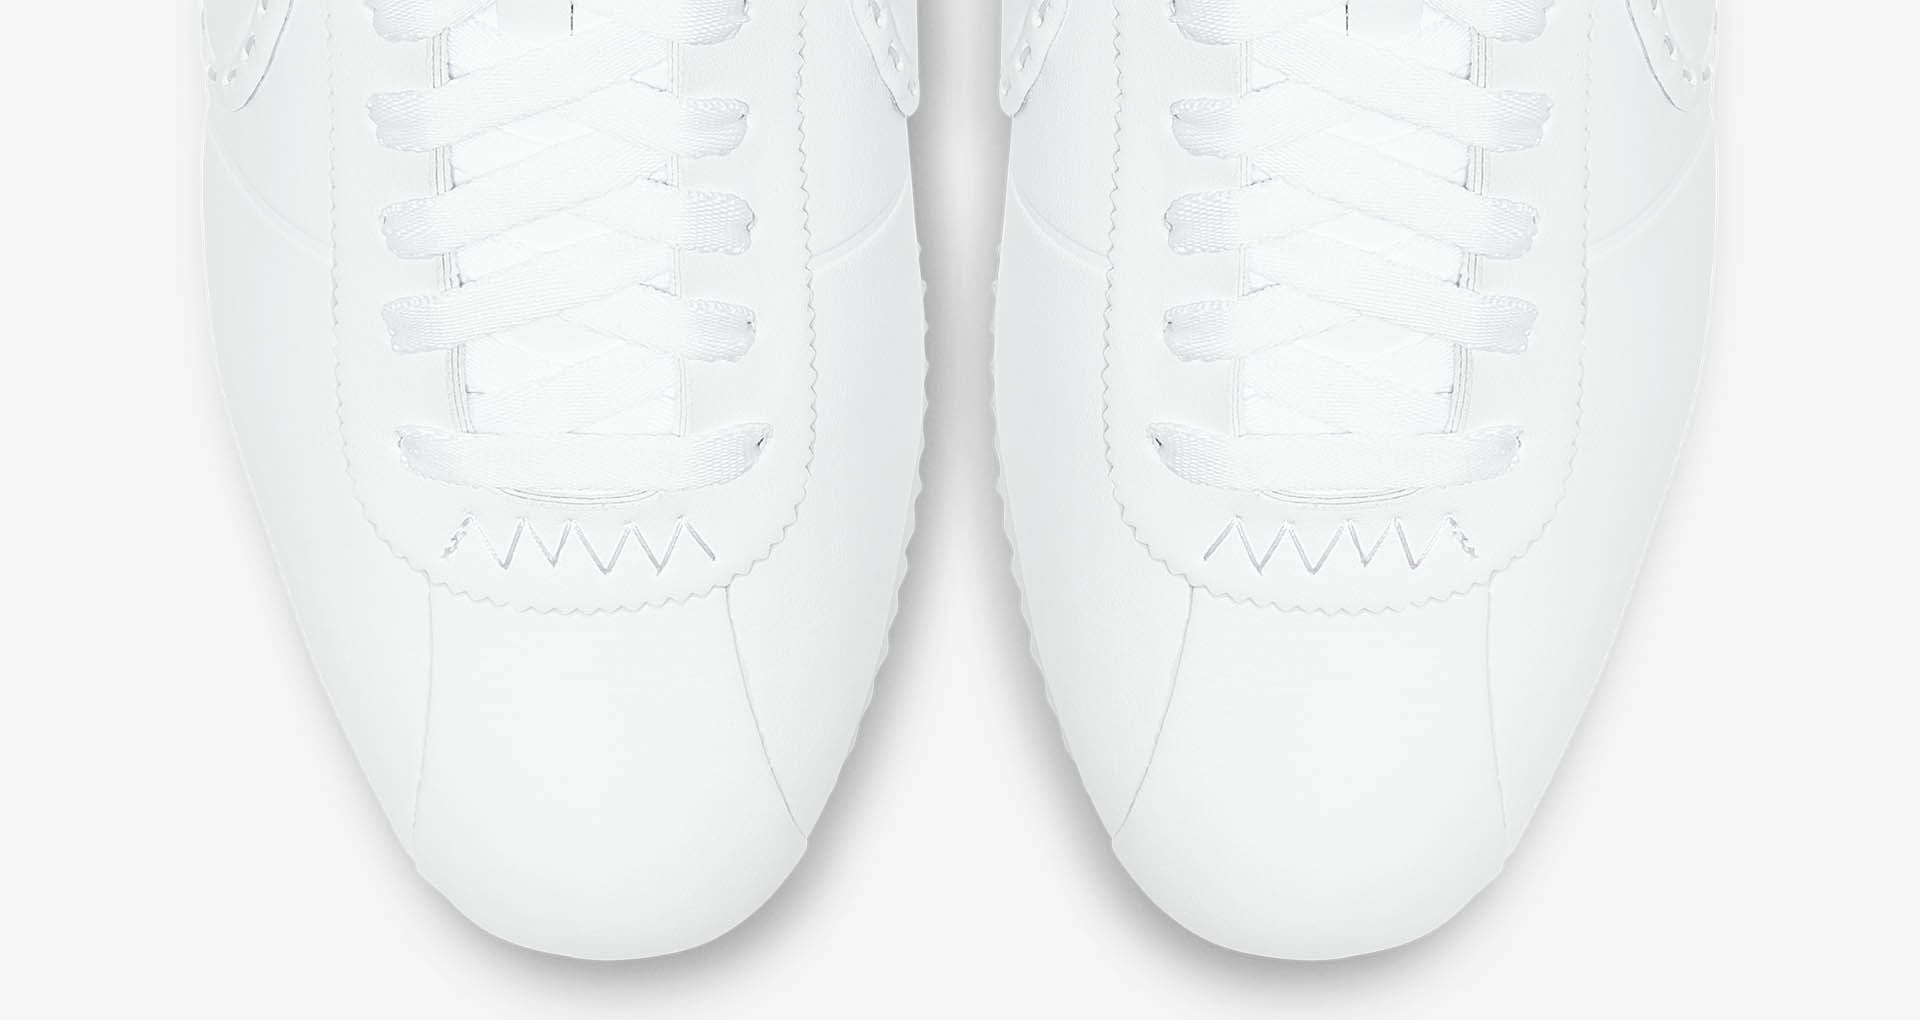 Nike Cortez 'Noise Cancelling White' Release Date. Nike SNKRS